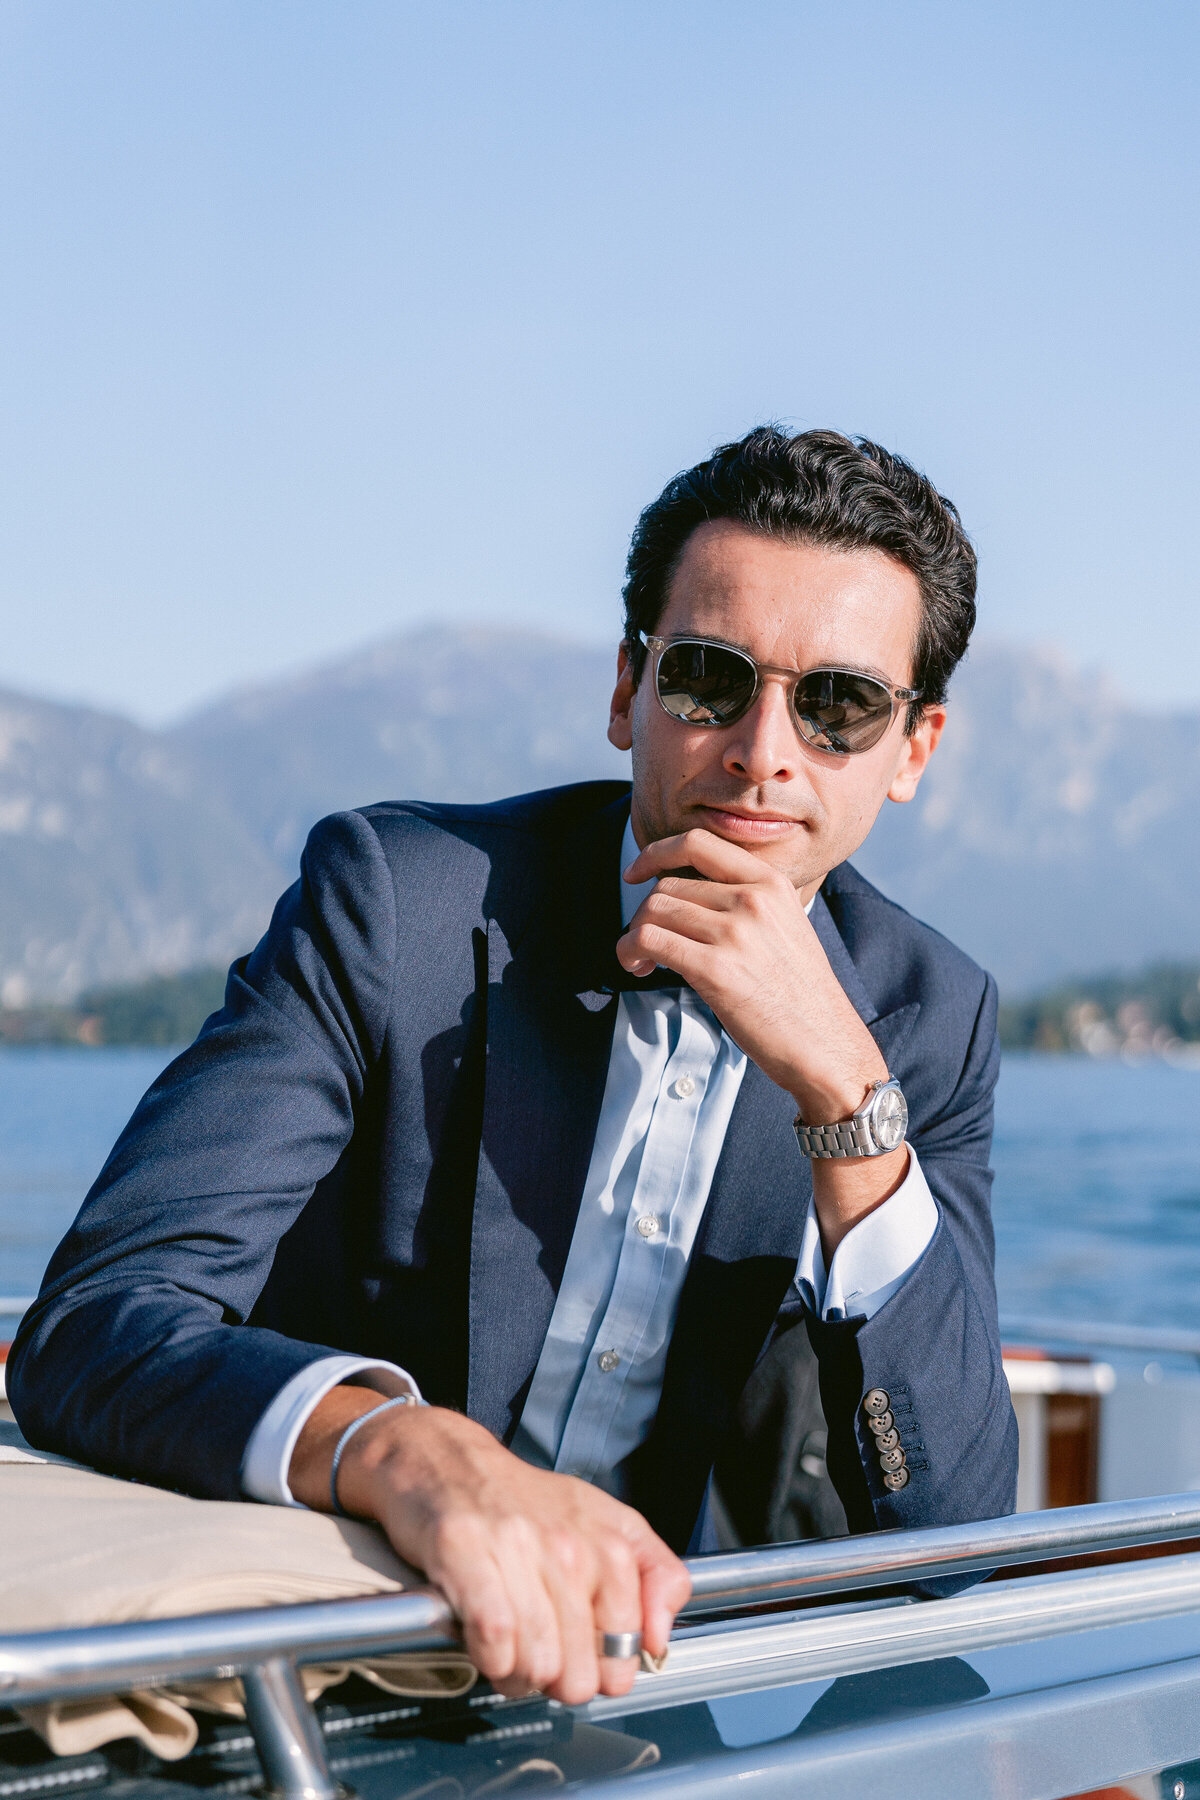 Groom wearing sunglasses on a private boat on Lake Como, Italy